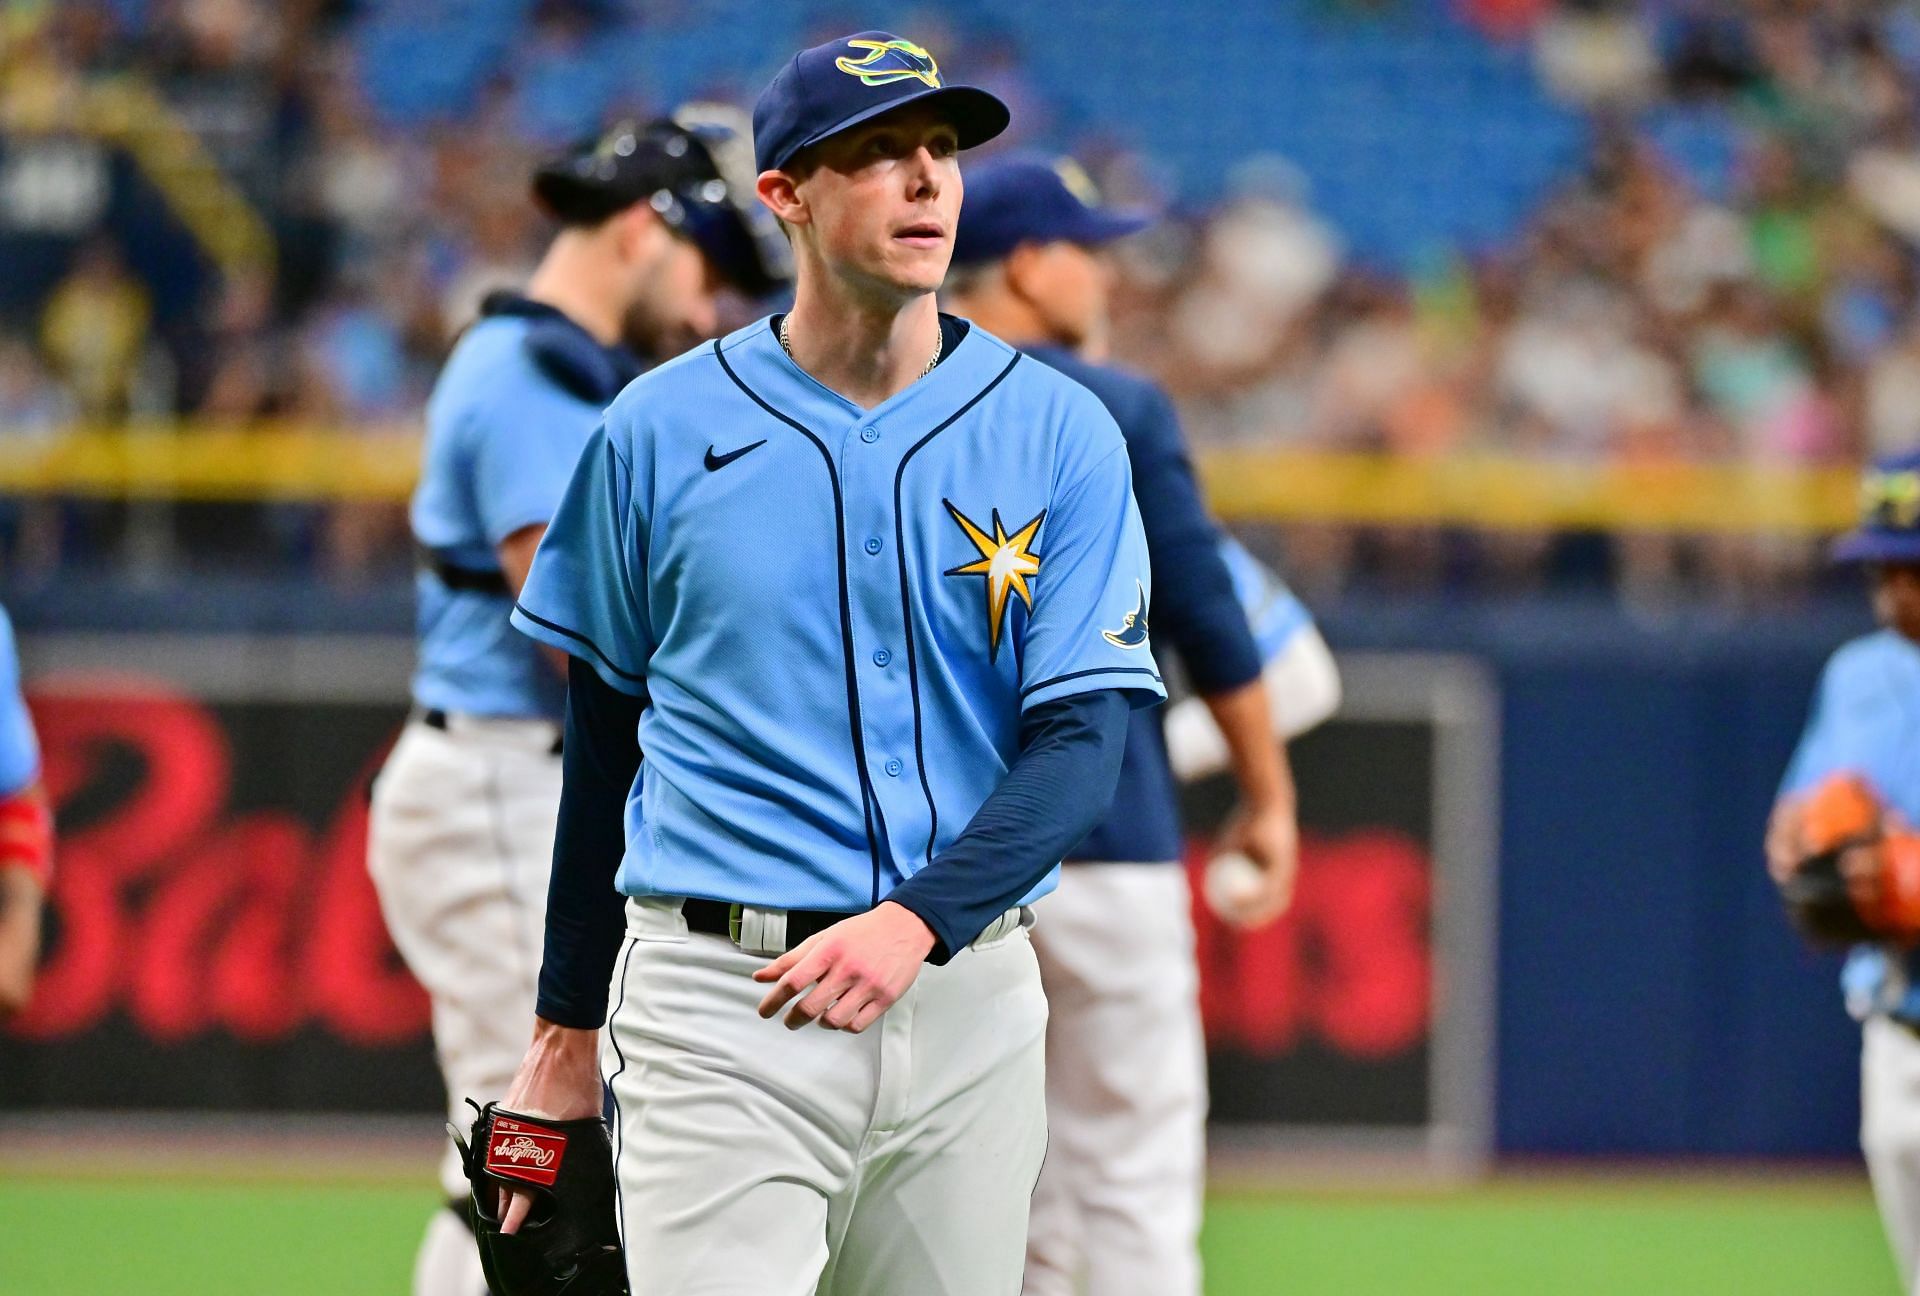 Tampa Bay Rays players decline to wear LGBT logos on uniform for